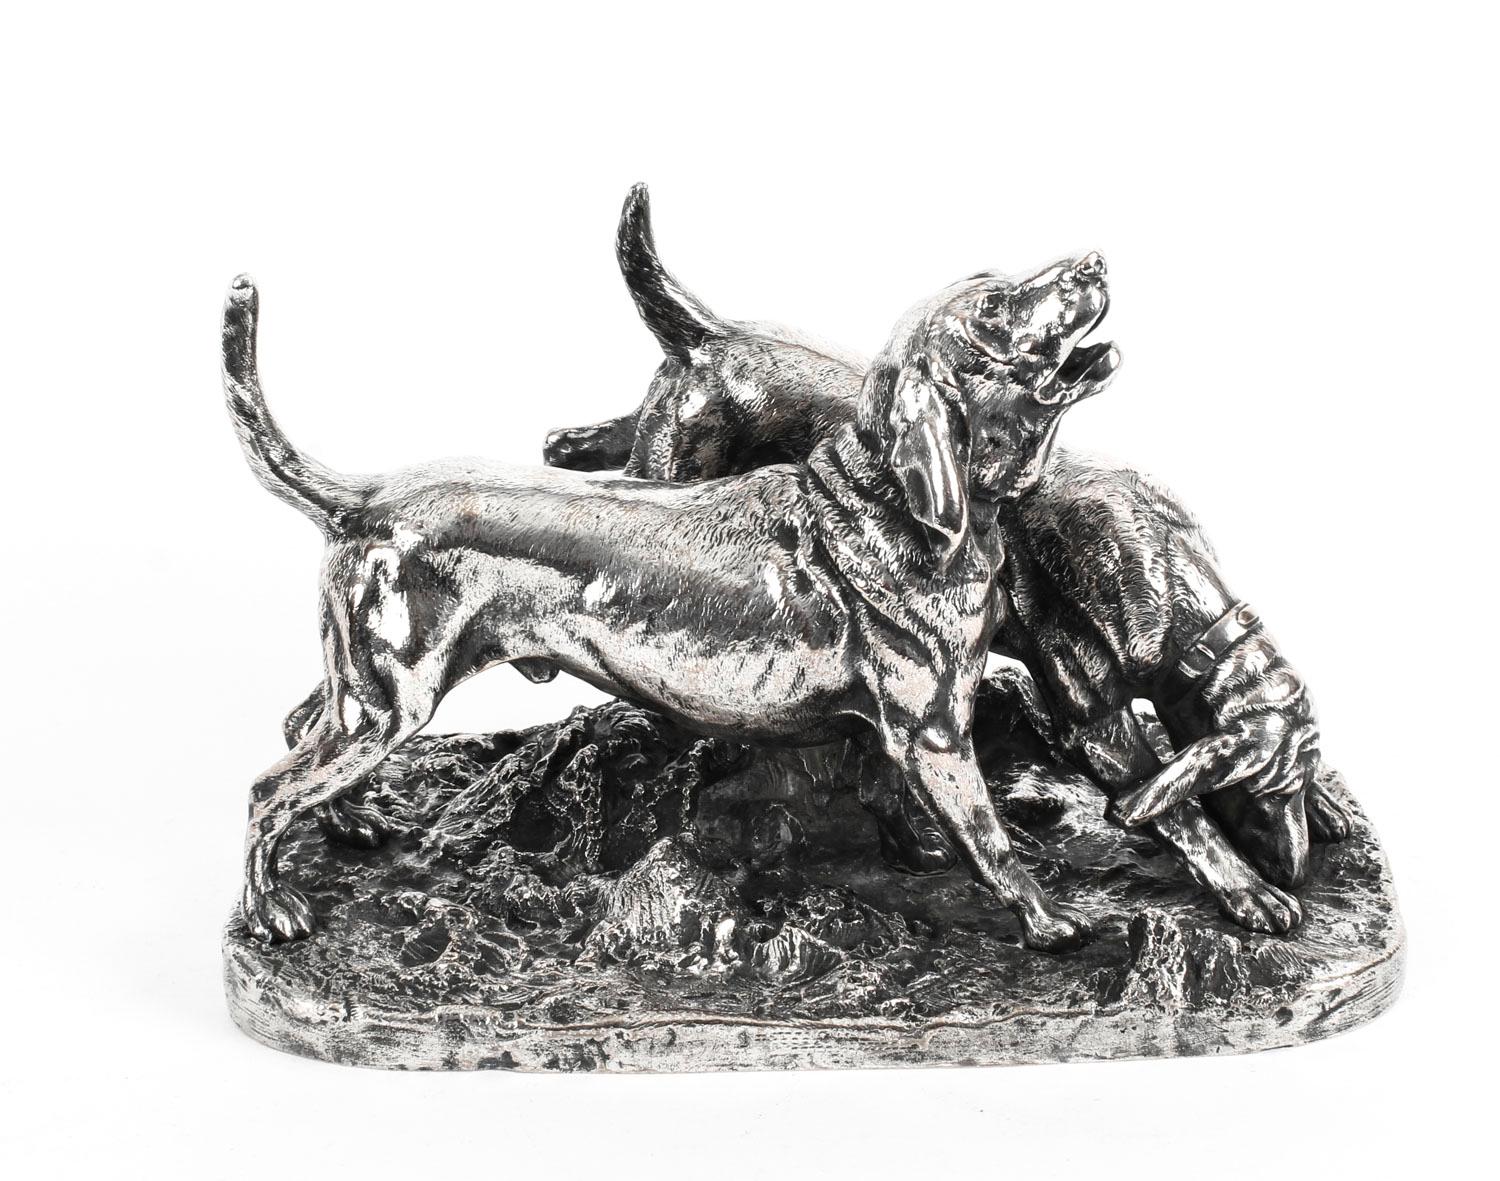 A fantastic English silver plated bronze centrepiece sculpture of a pair of hunting dogs, stamped with the name of the renowned silversmith Elkington, 19th century in date.

Skillfully cast in excellent detail, the sculpture features a pair of